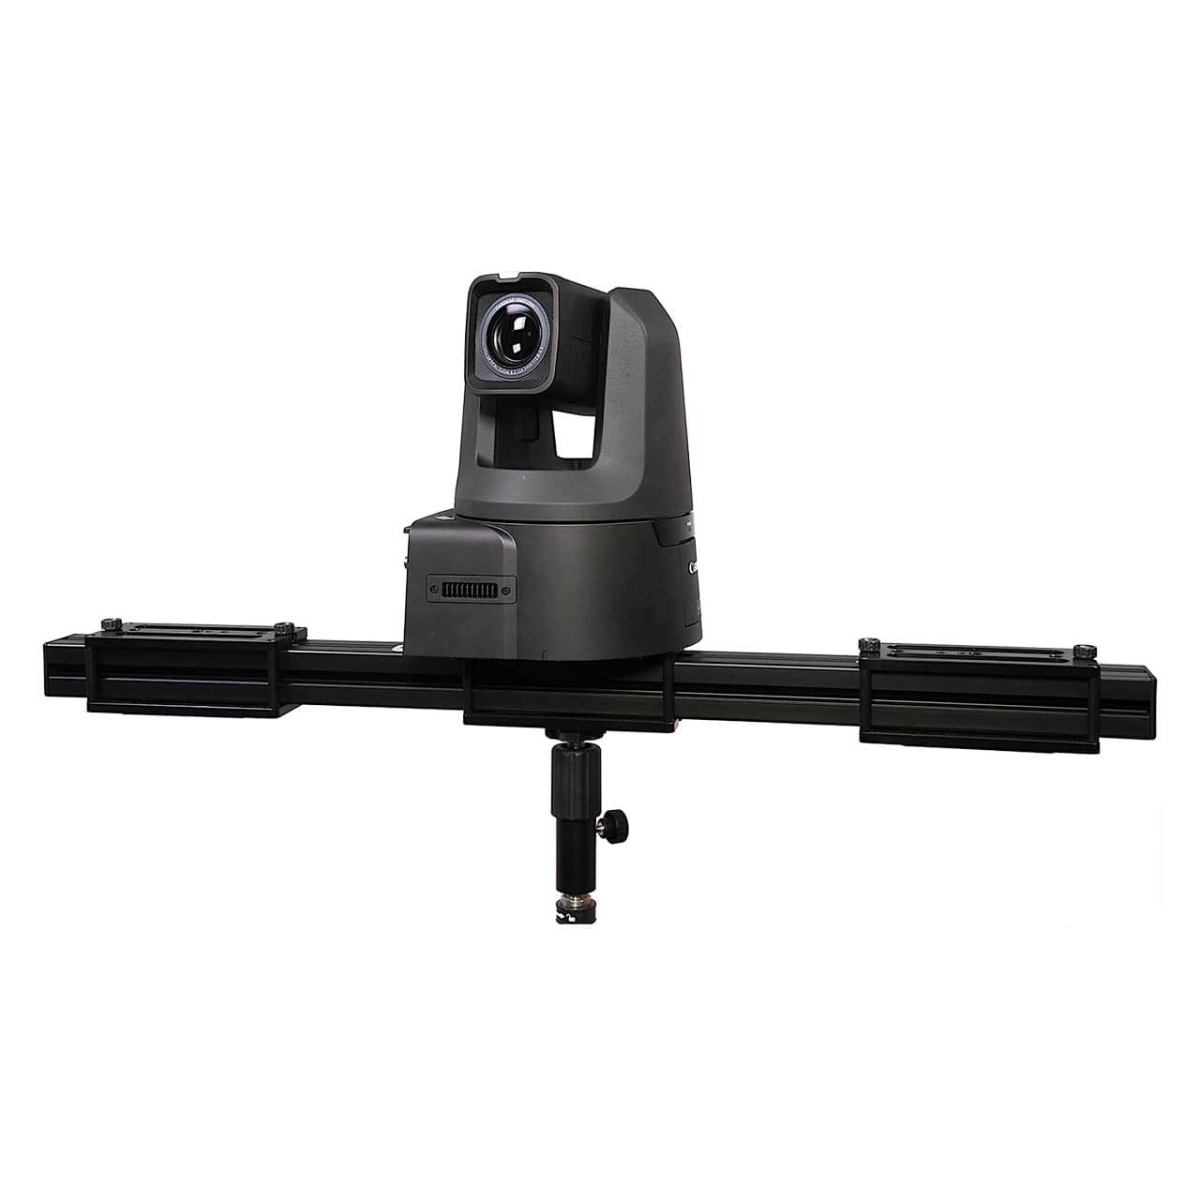 Picture of Cartoni USA CAR-APTZ001 PTZ TBar Support - Supports up to 3 PTZ Cameras